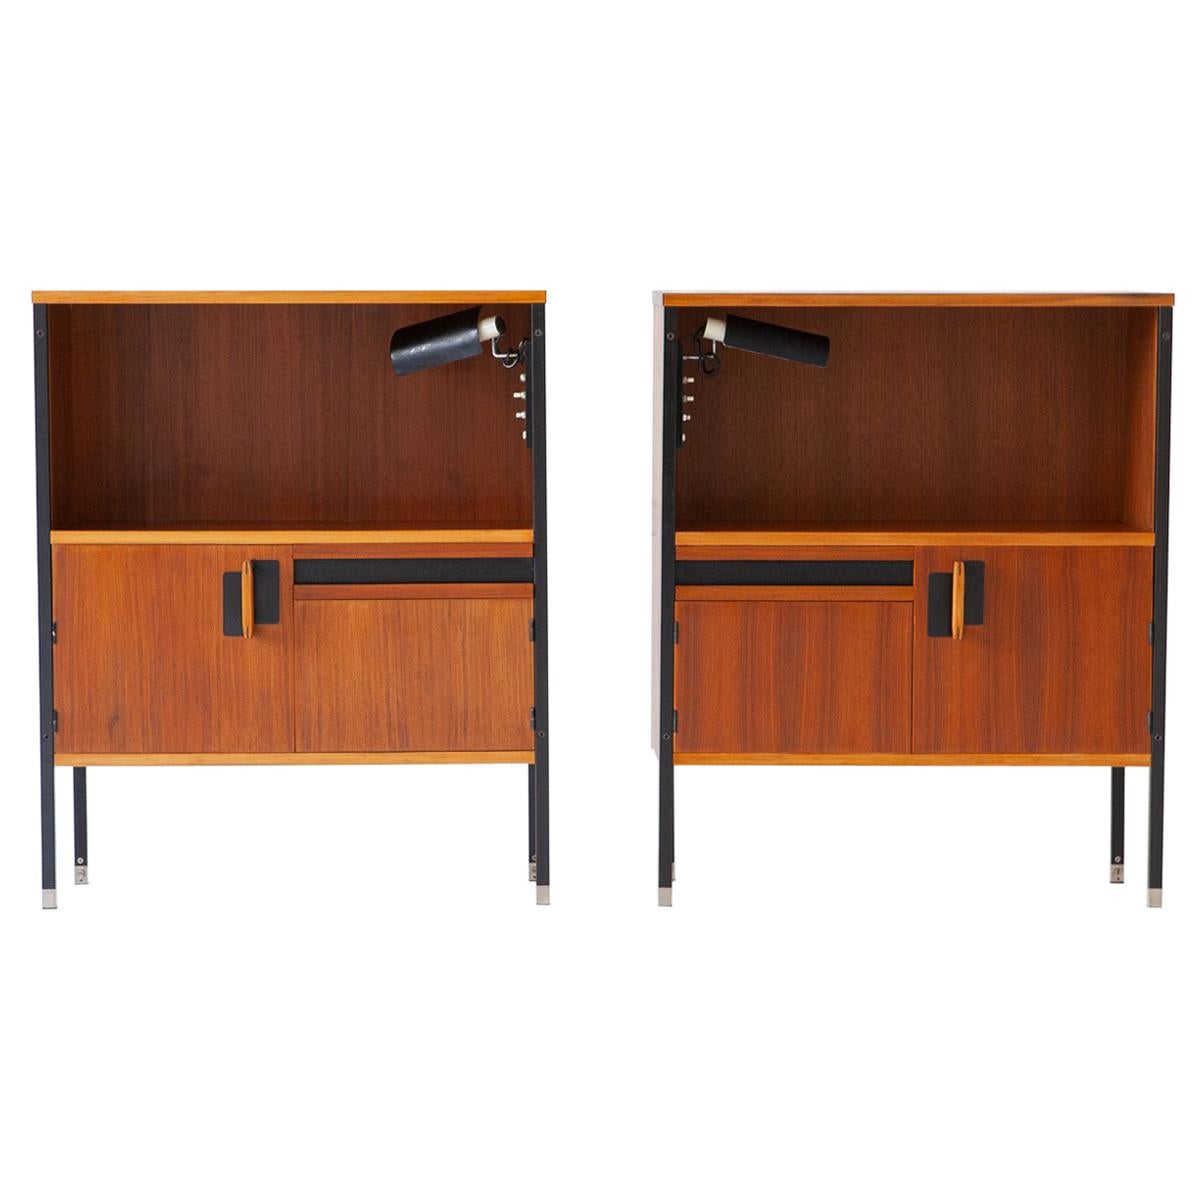 Restored Nightstands by Ico Parisi for MIM with Gino Sarfatti Lamps, 1958